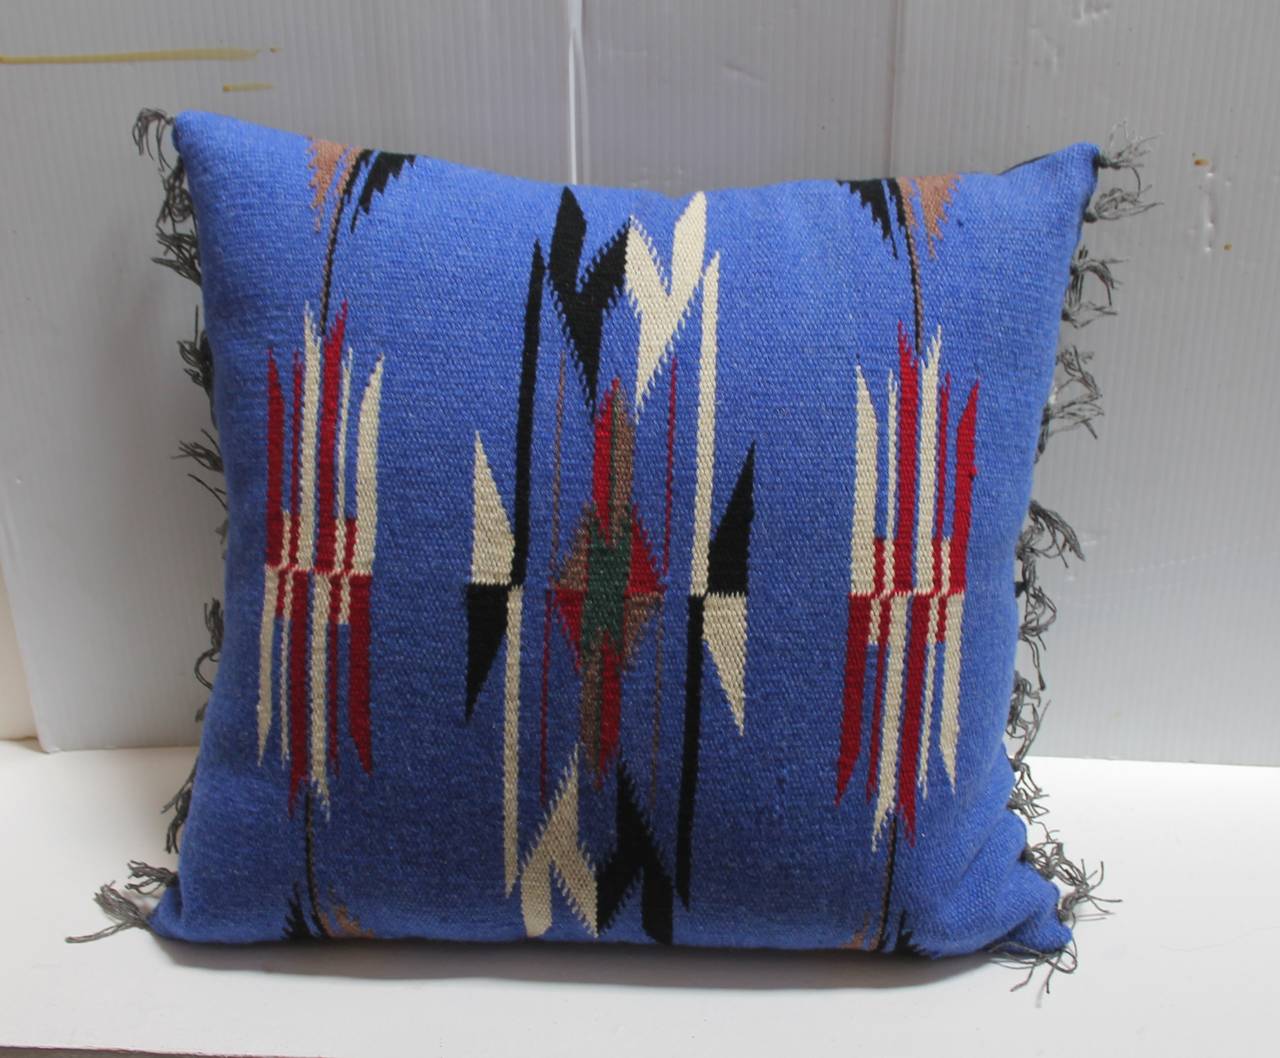 These  Mexican  Indian weaving pillows are so fantastic and vibrant with all the original fringe. This is most unusual to find a matching pair in such good condition. The backing is in a black cotton linen. Zipper closures.